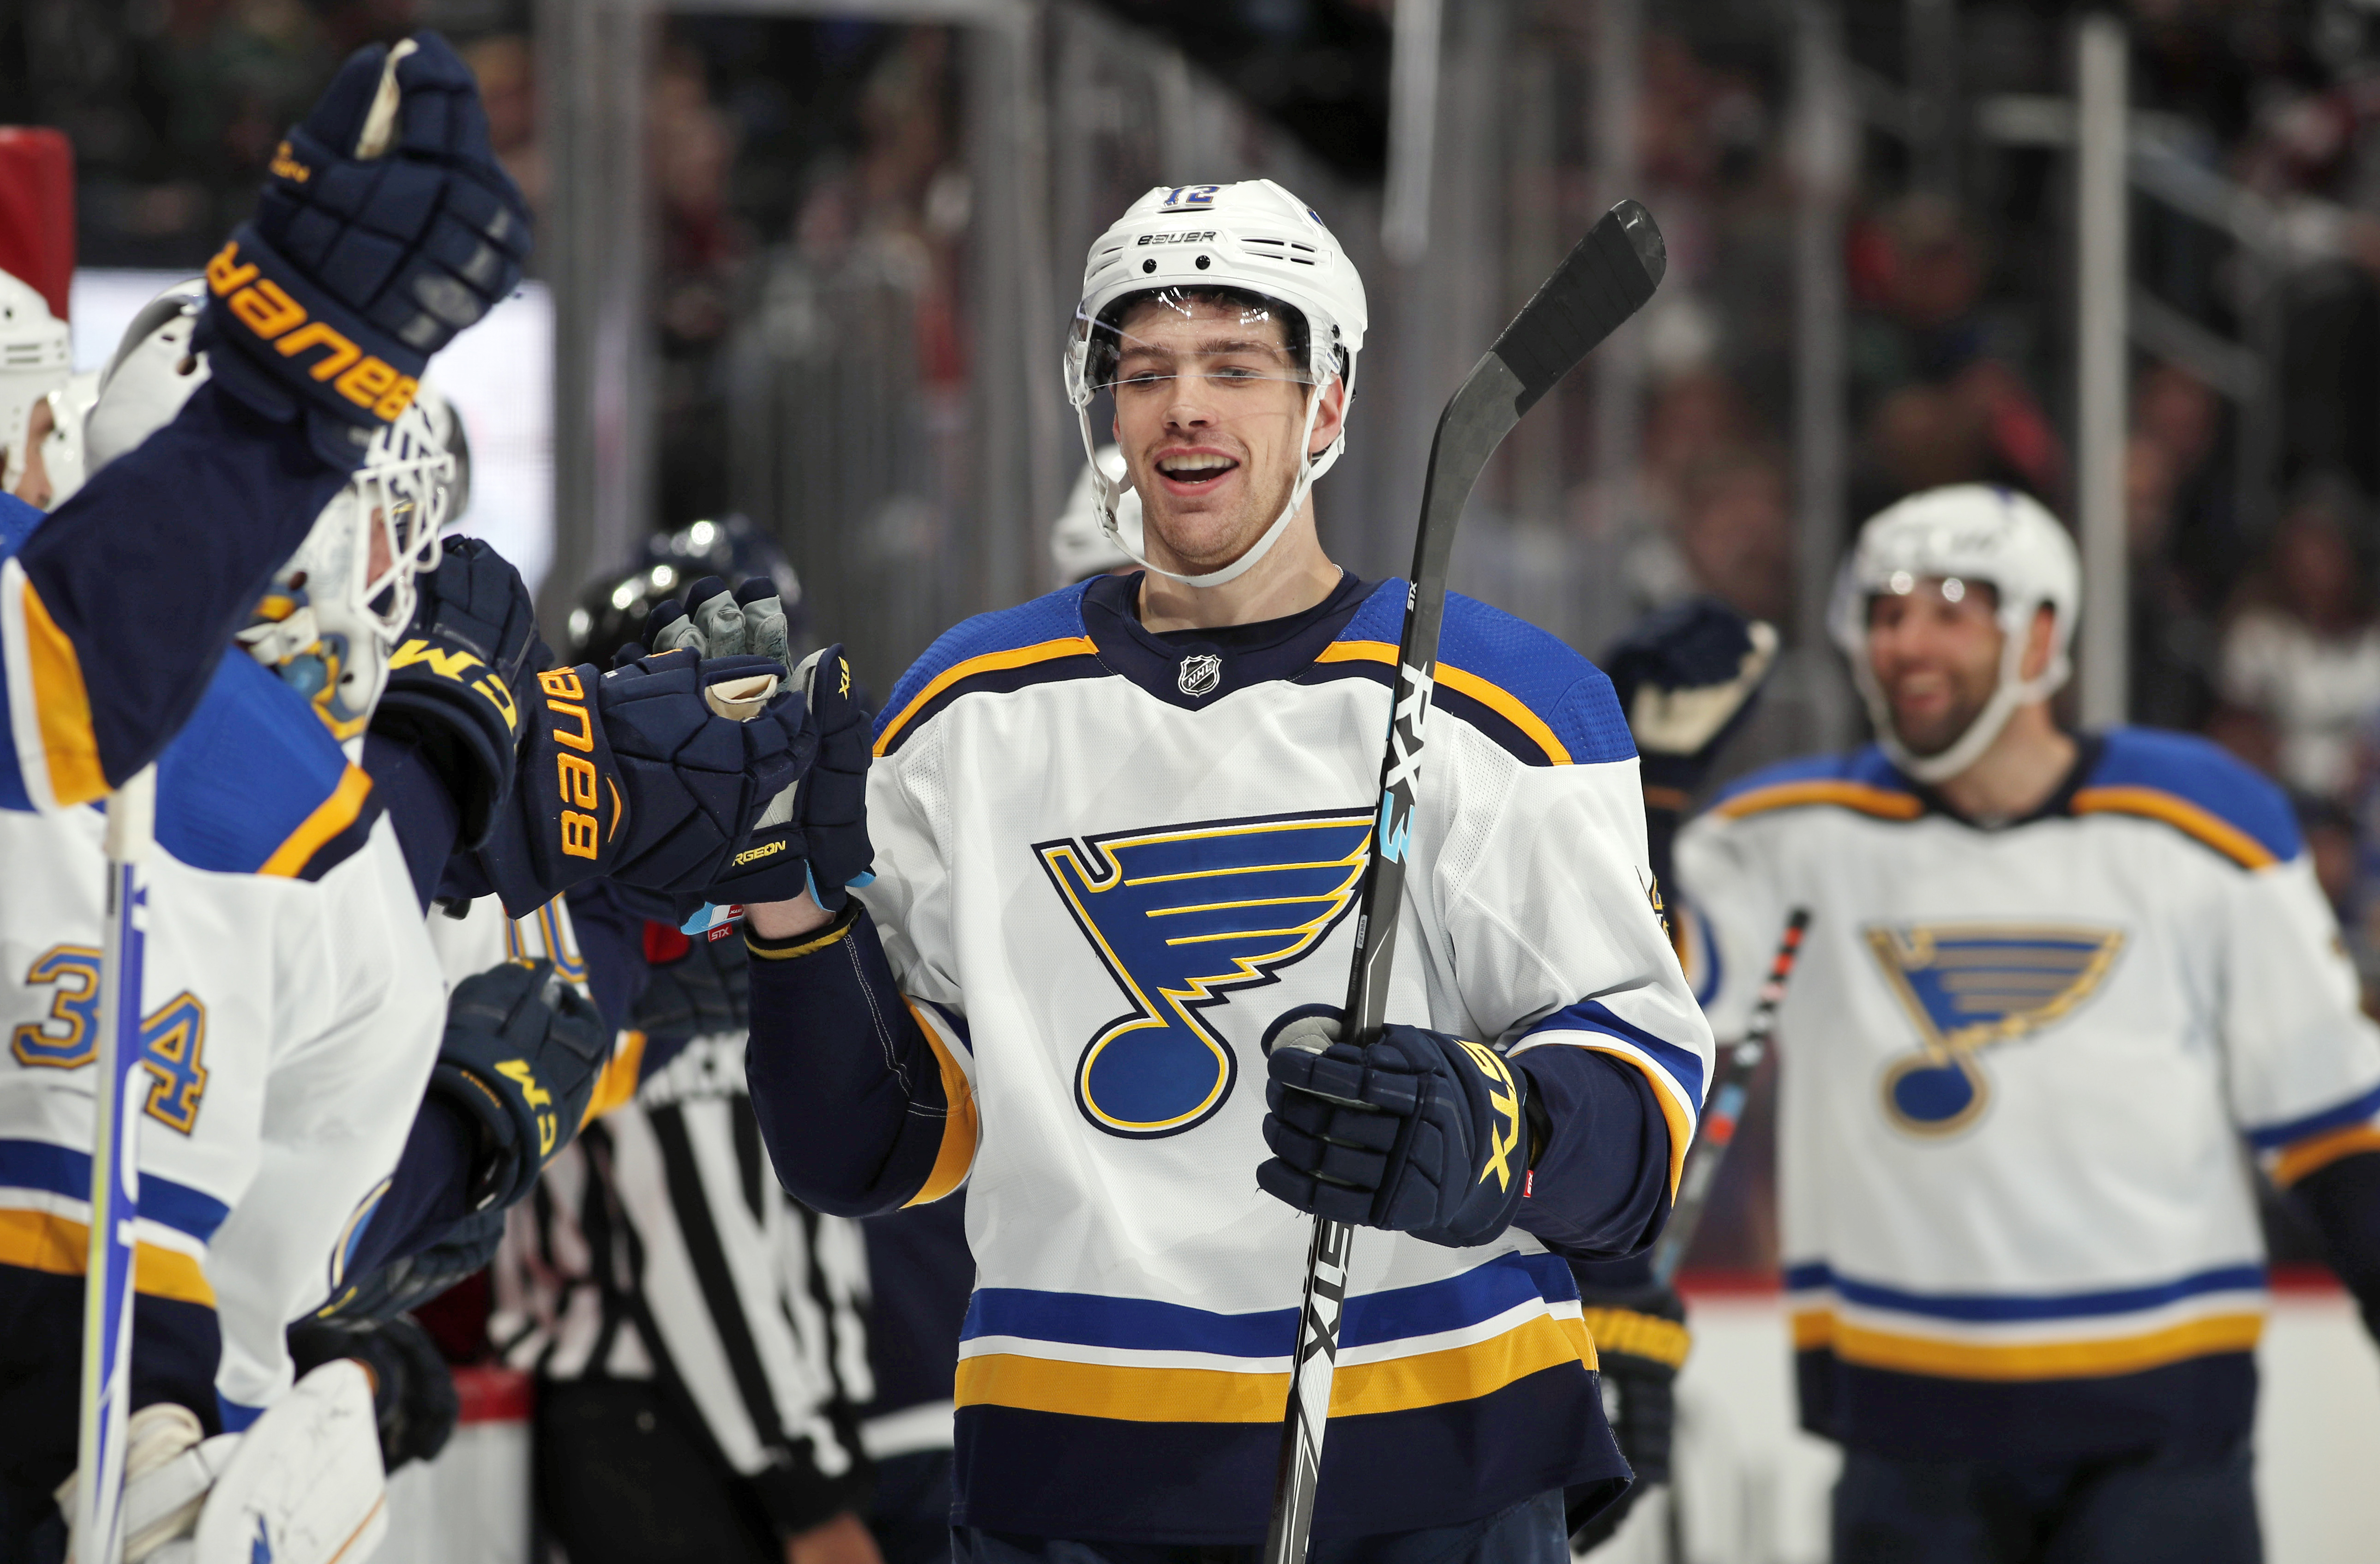 Sanford rejoins Blues lineup for Game 3 of Stanley Cup Final